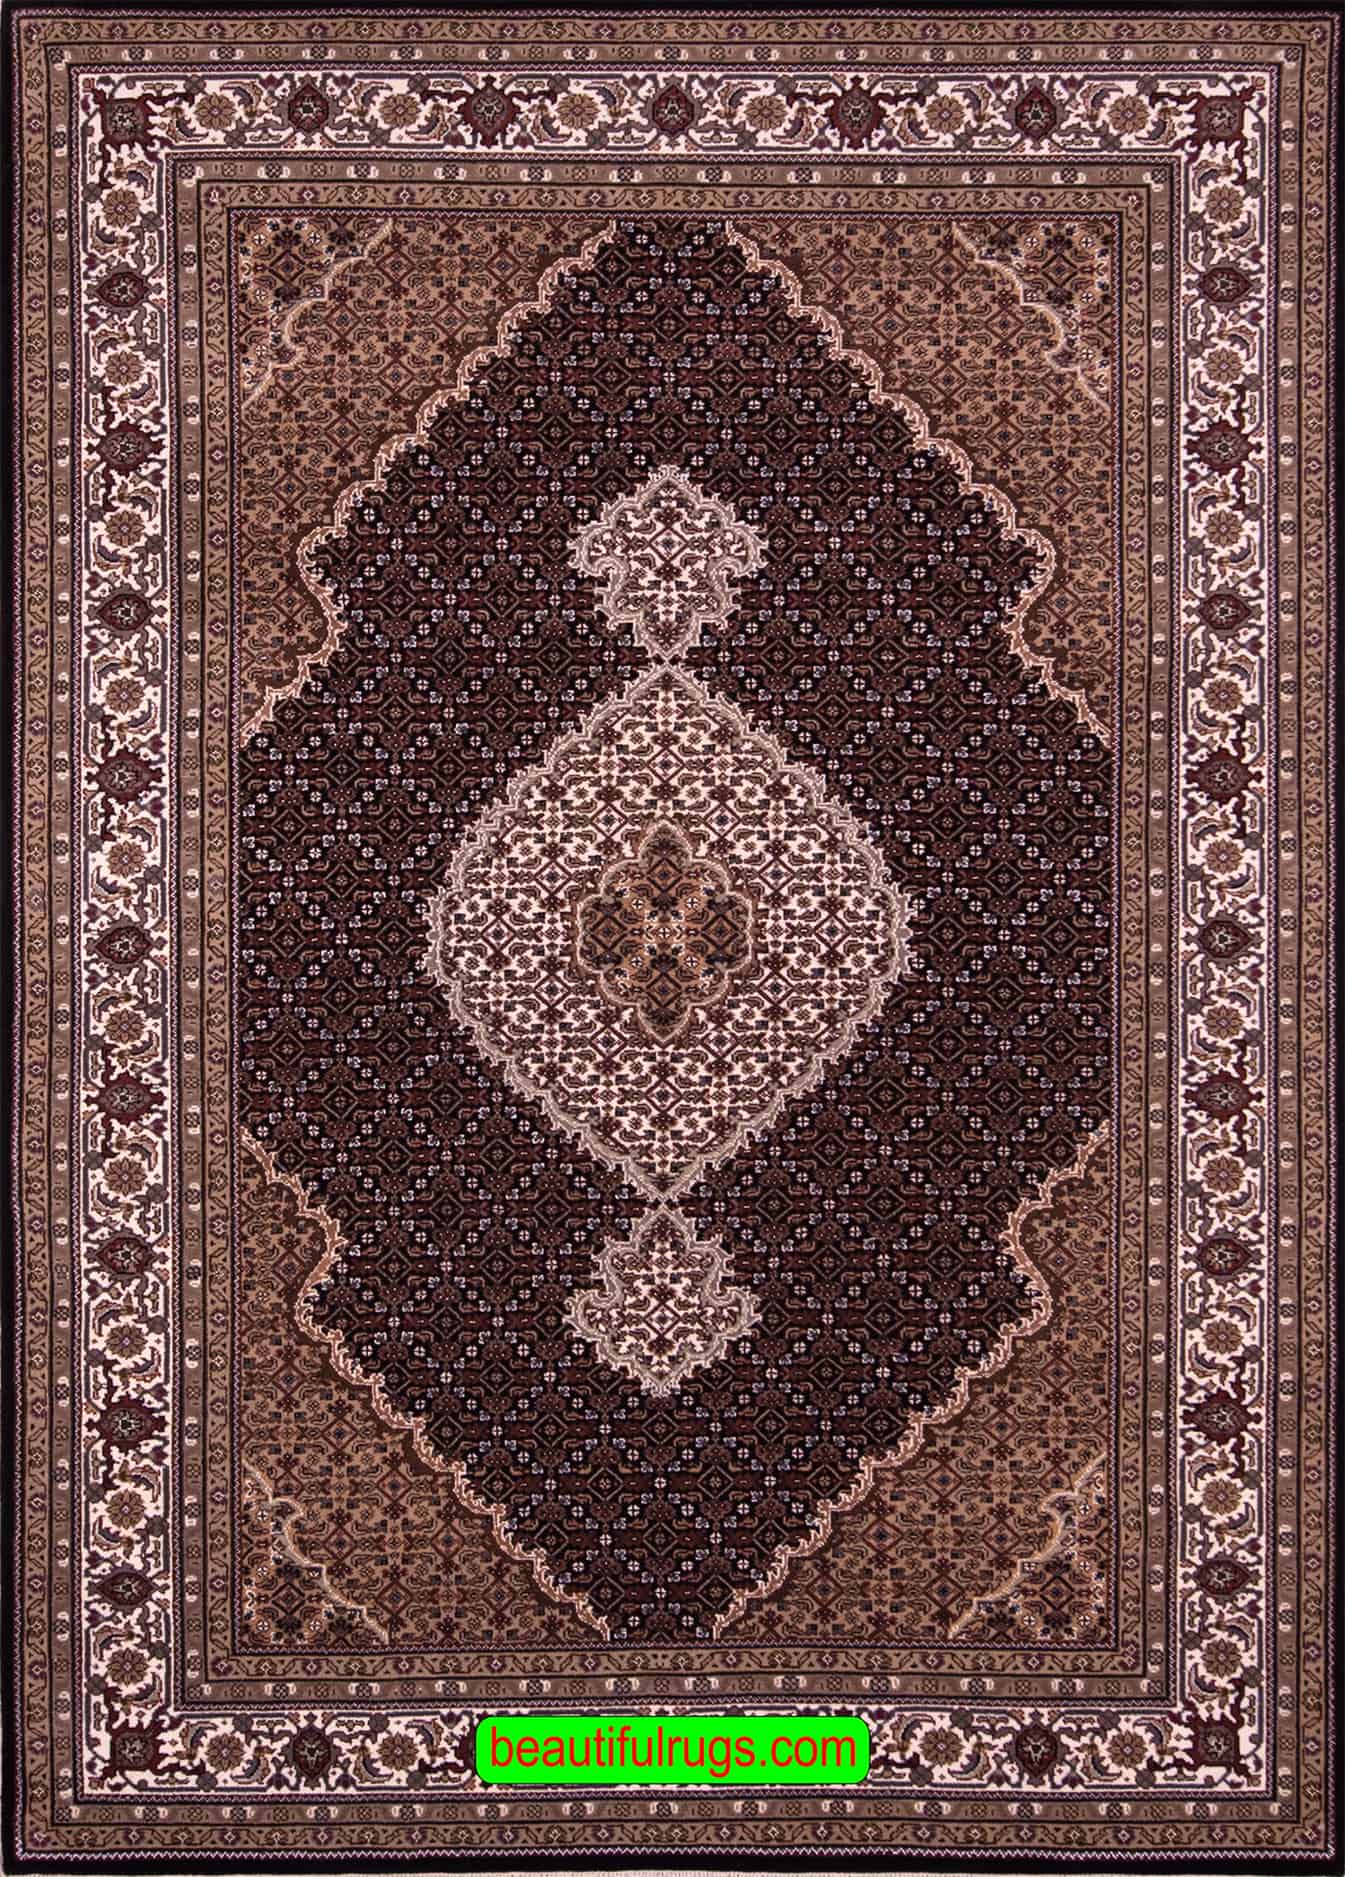 Black Color Indian Rug, Traditional Oriental Rug, size 5.10x9